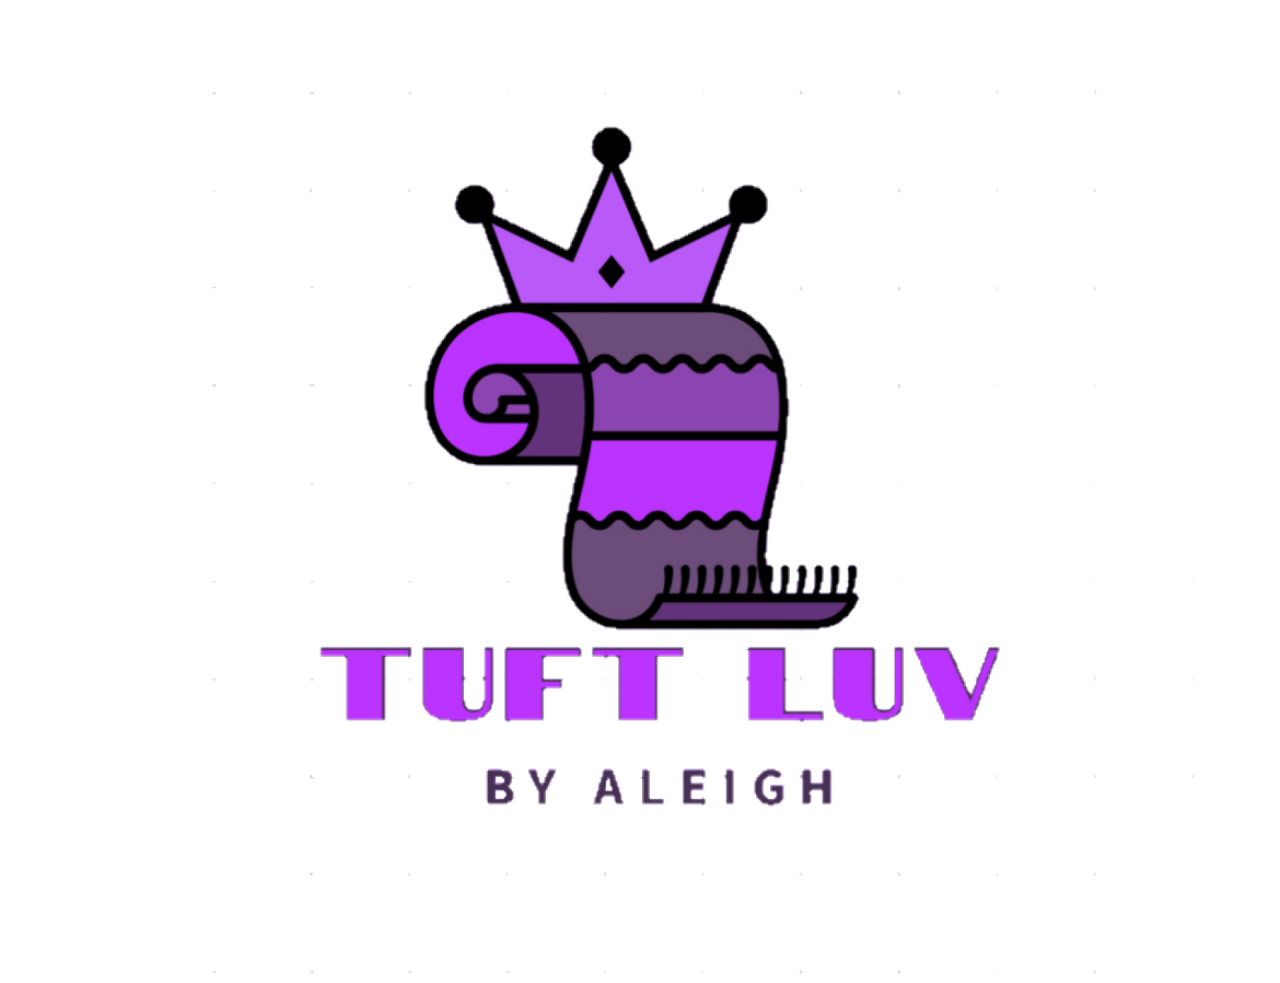 Tuft Luv's web page